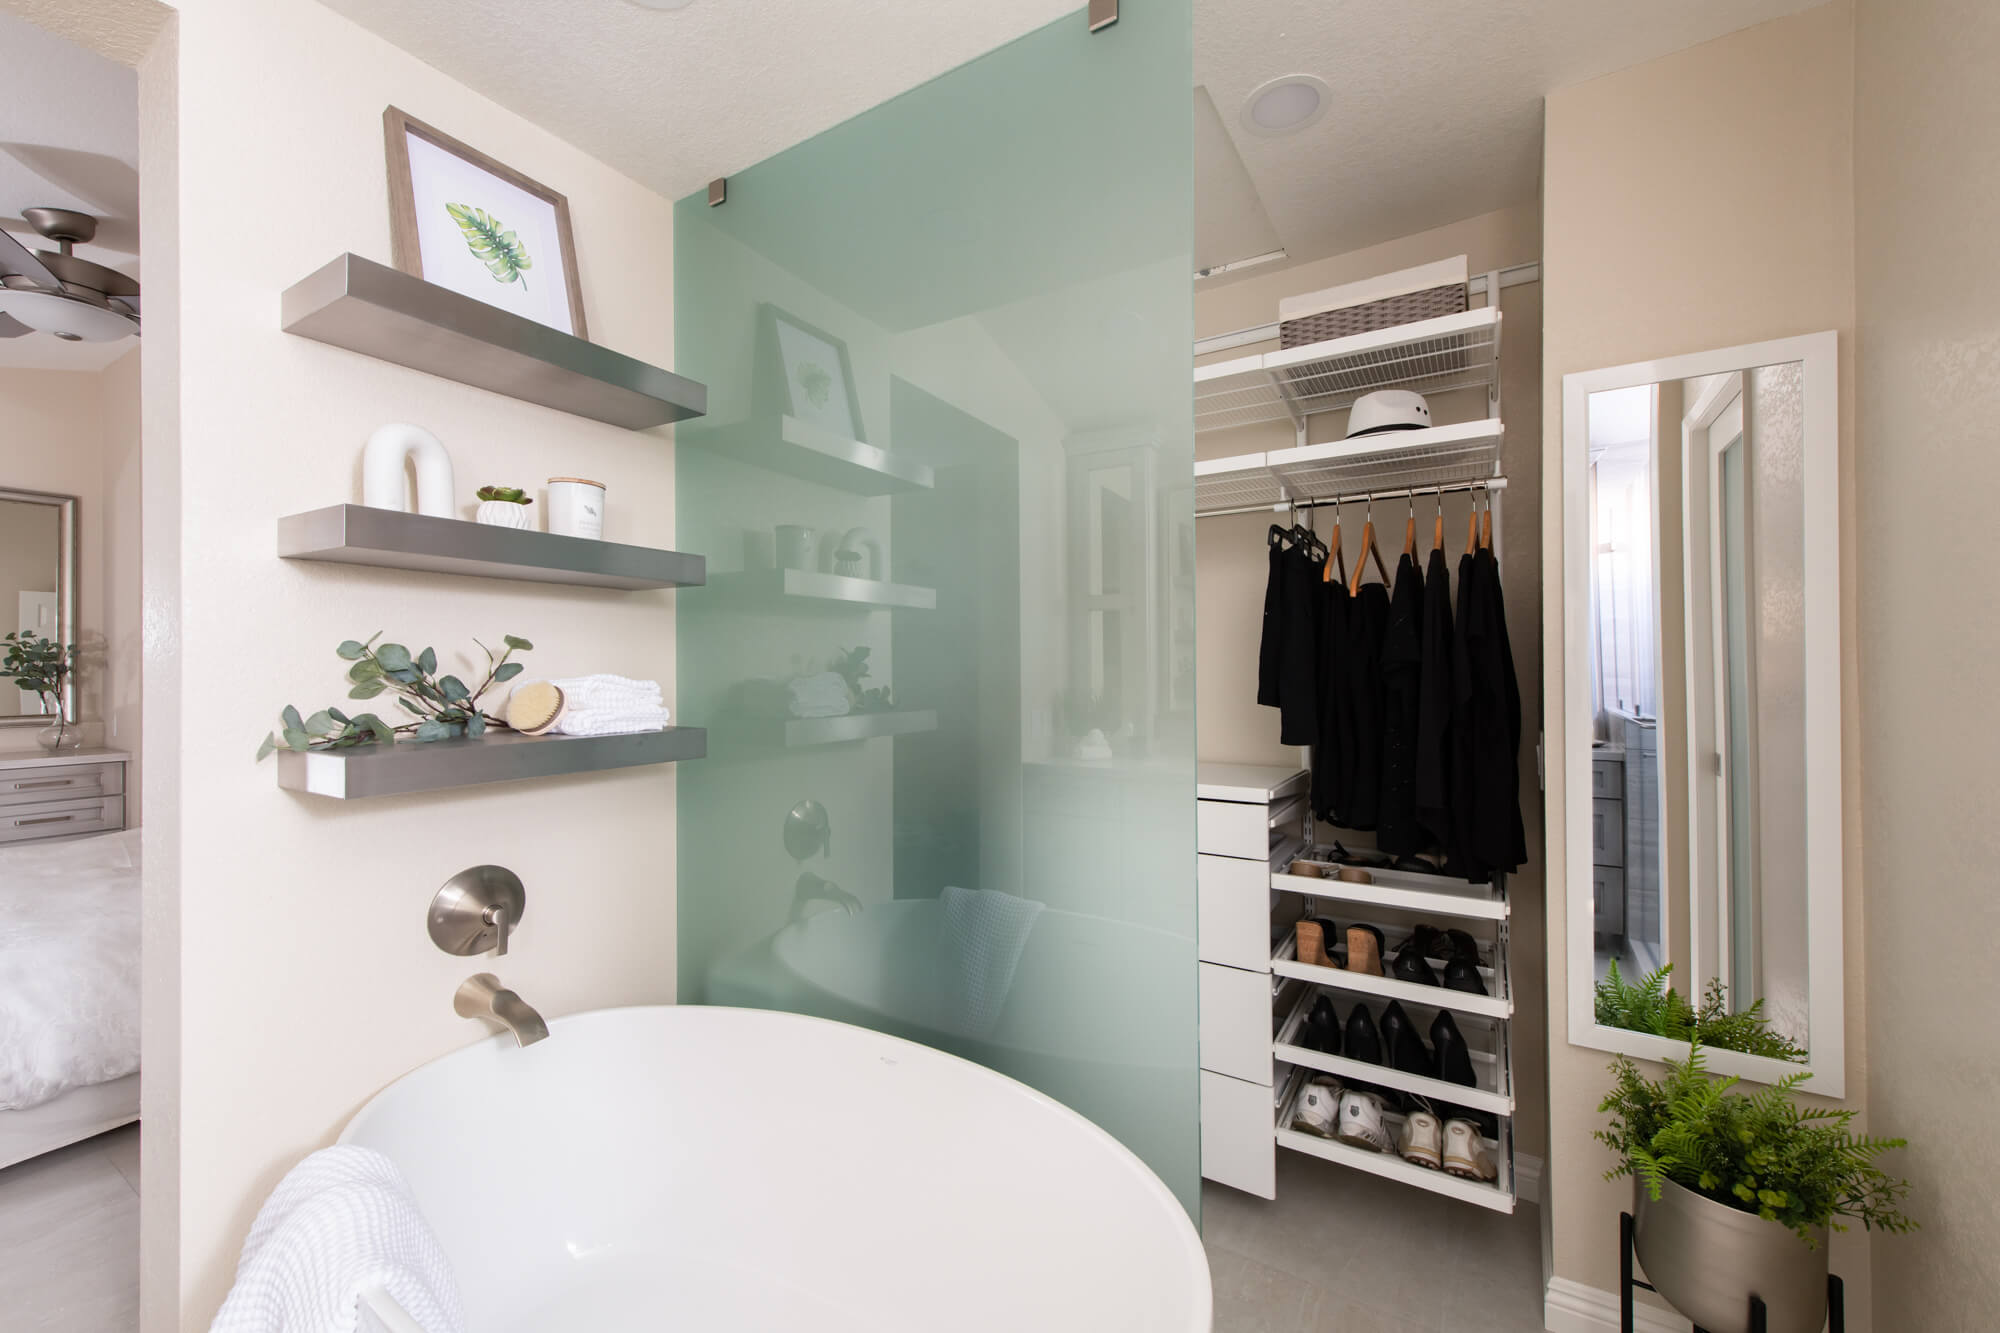 Walk-in closet glass divider in Foothill Ranch bathroom remodel - custom remodeling ideas